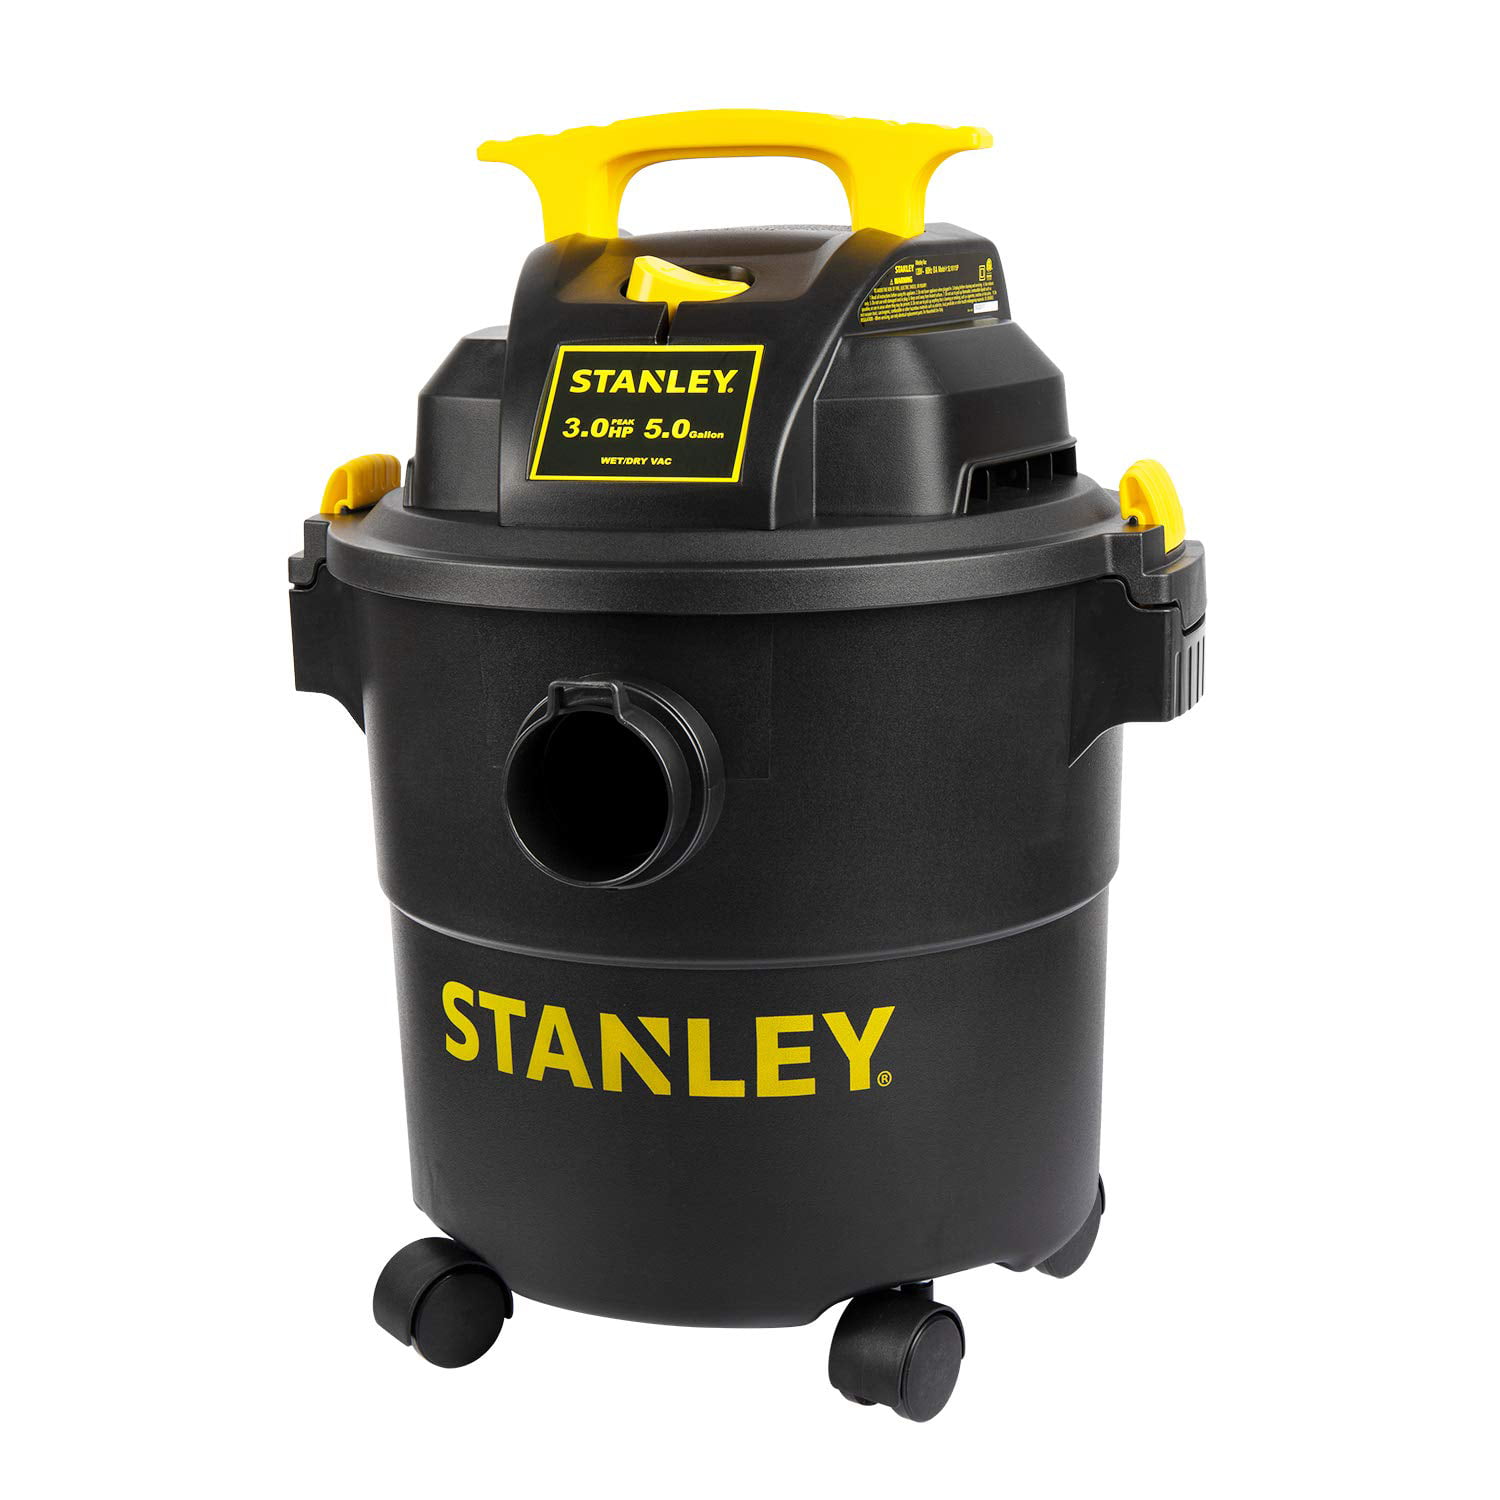 Blower 3 In 1 Functions 15 Feet Cleaning Range For Garage 5 Gallon Peak 4 Horsepower Wet Dry Vacuums Car Detailing with Attachments Stanley Shop Vac SL18115P Shop Cleaning Carpet Clean 